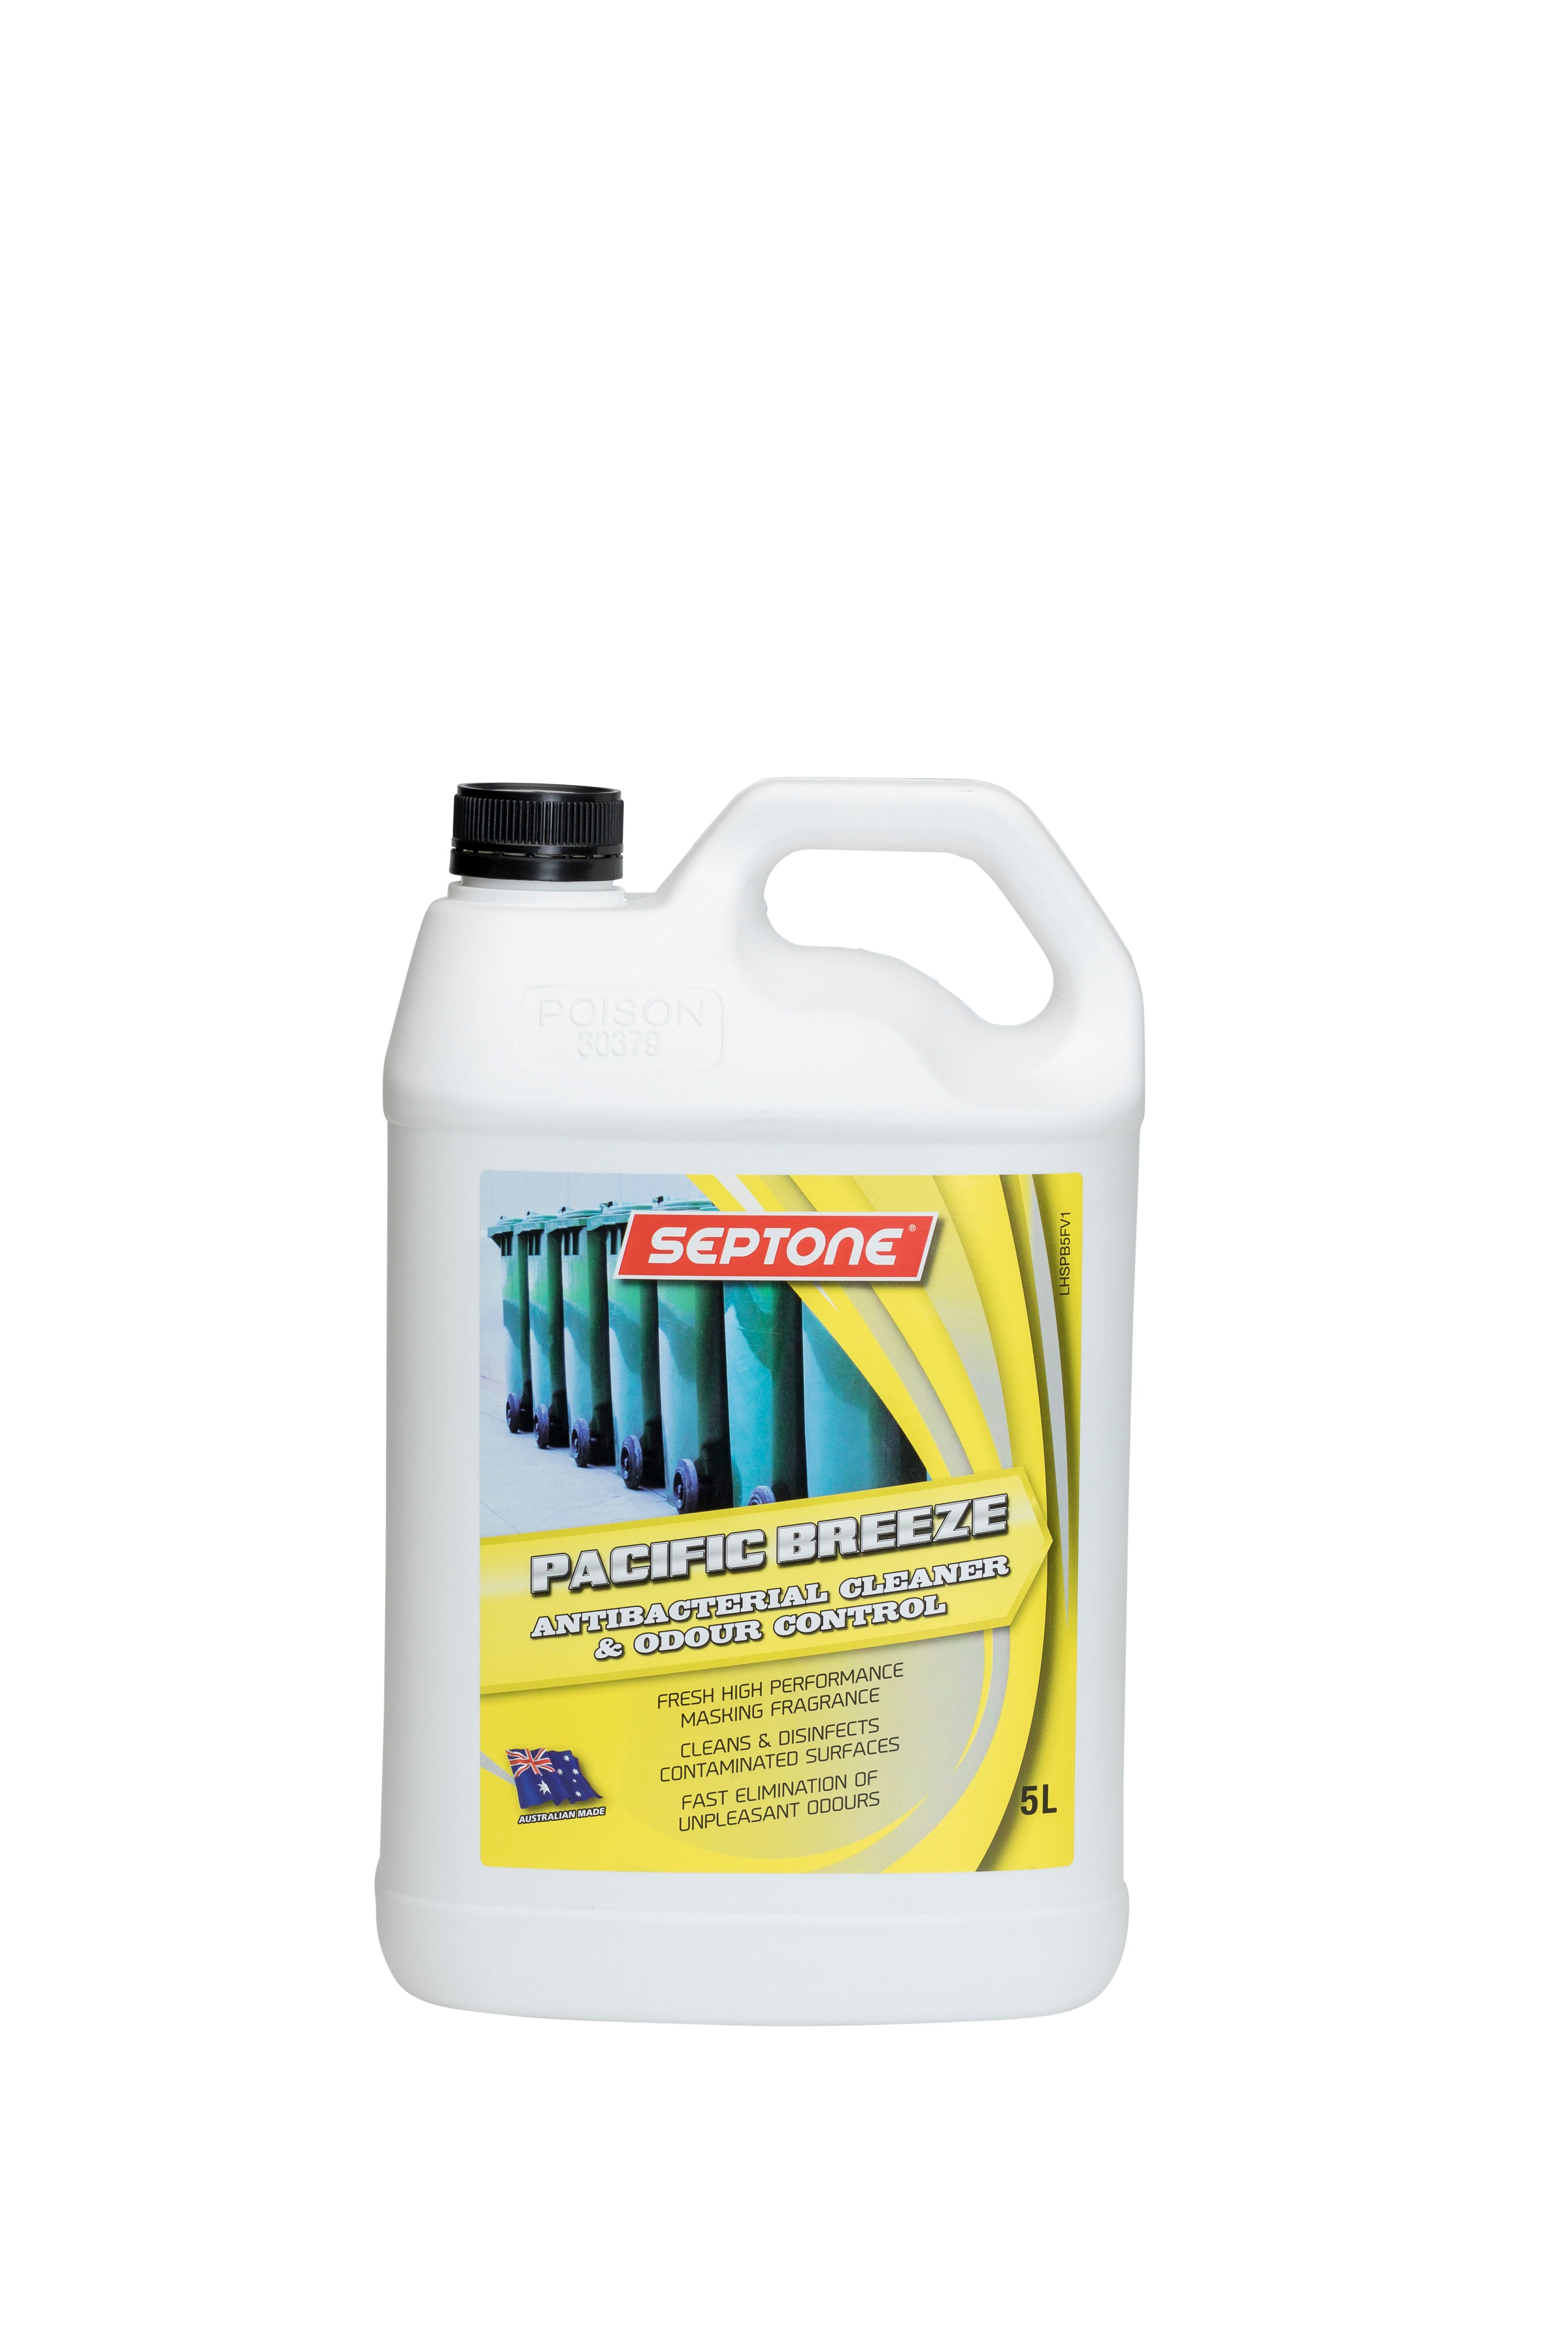 SEPTONE PACIFIC BREEZE 5L ANTI-BACTERIA CLEANER